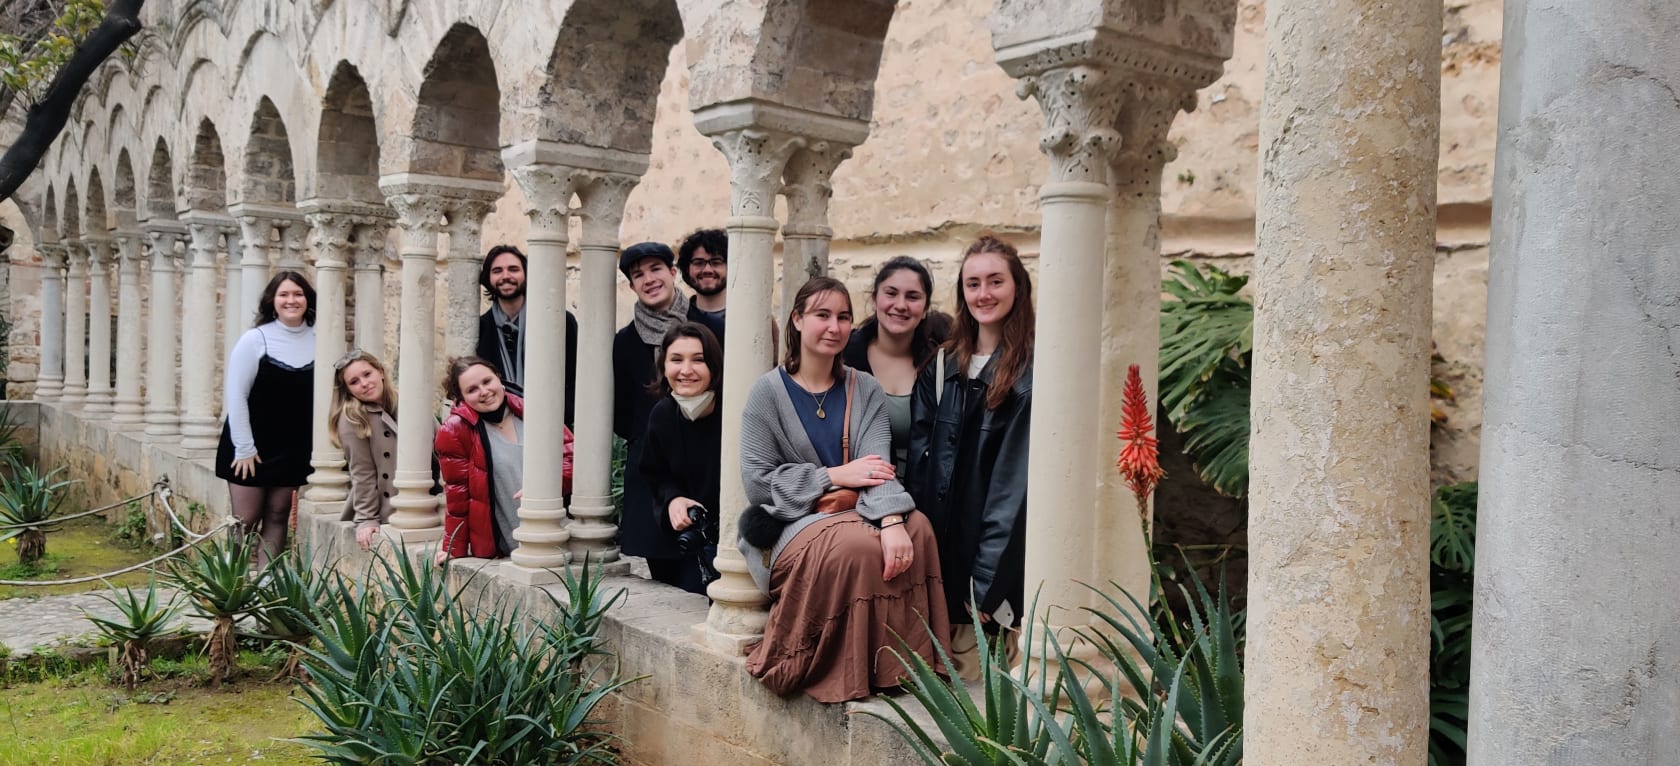 Study abroad students in Rome, Italy, visit the Erremiti Cloister.